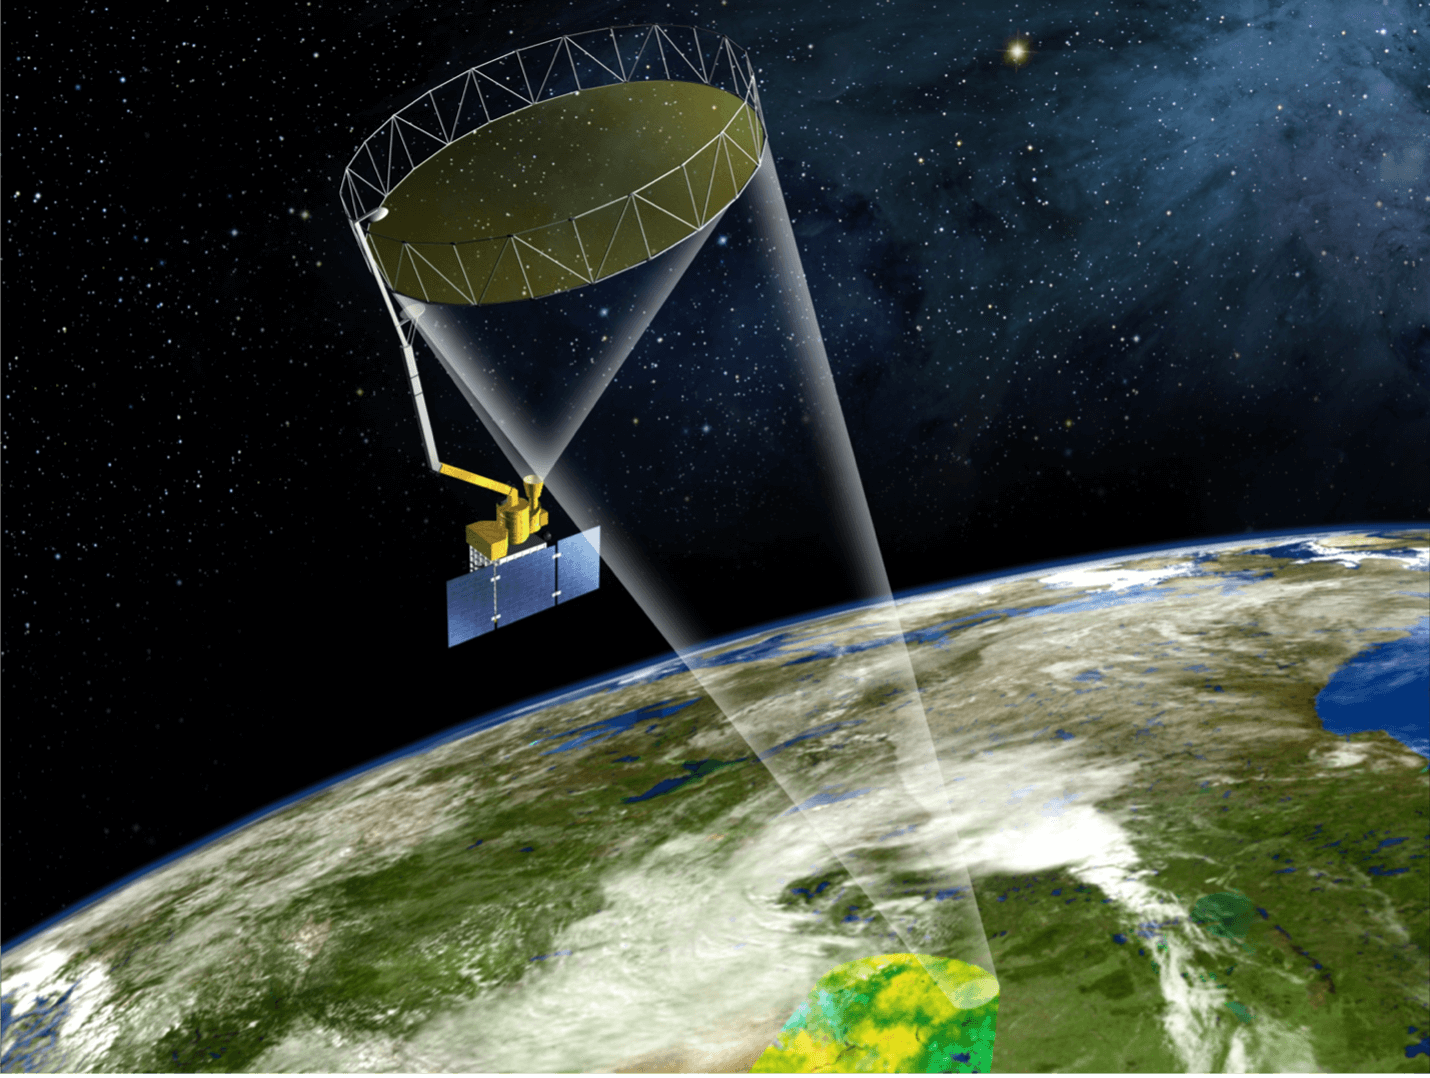 An artist’s illustration of the SMAP satellite is shown above green land, blue water, and white clouds. The satellite has an olive green  circle at the top with small triangular fencing around it. There are two white lines going down to the land from the circle. The circle of the lines gets smaller as it reaches the land. There is another cone of white lines that goes from the top circle to the gold satellite instrument. The top circle is attached to the gold instrument with a gray pole. The gold instrument is mainly rectangular in shape. On one side there are three blue panels that are connected to it. These represent solar panels, and are rectangular in shape. Above the land and water is a curved line. Above the curved line in the background is black and white dots for stars to represent space. On the bottom middle of Earth there is greens and yellows simulating what the data looks like from the satellite.